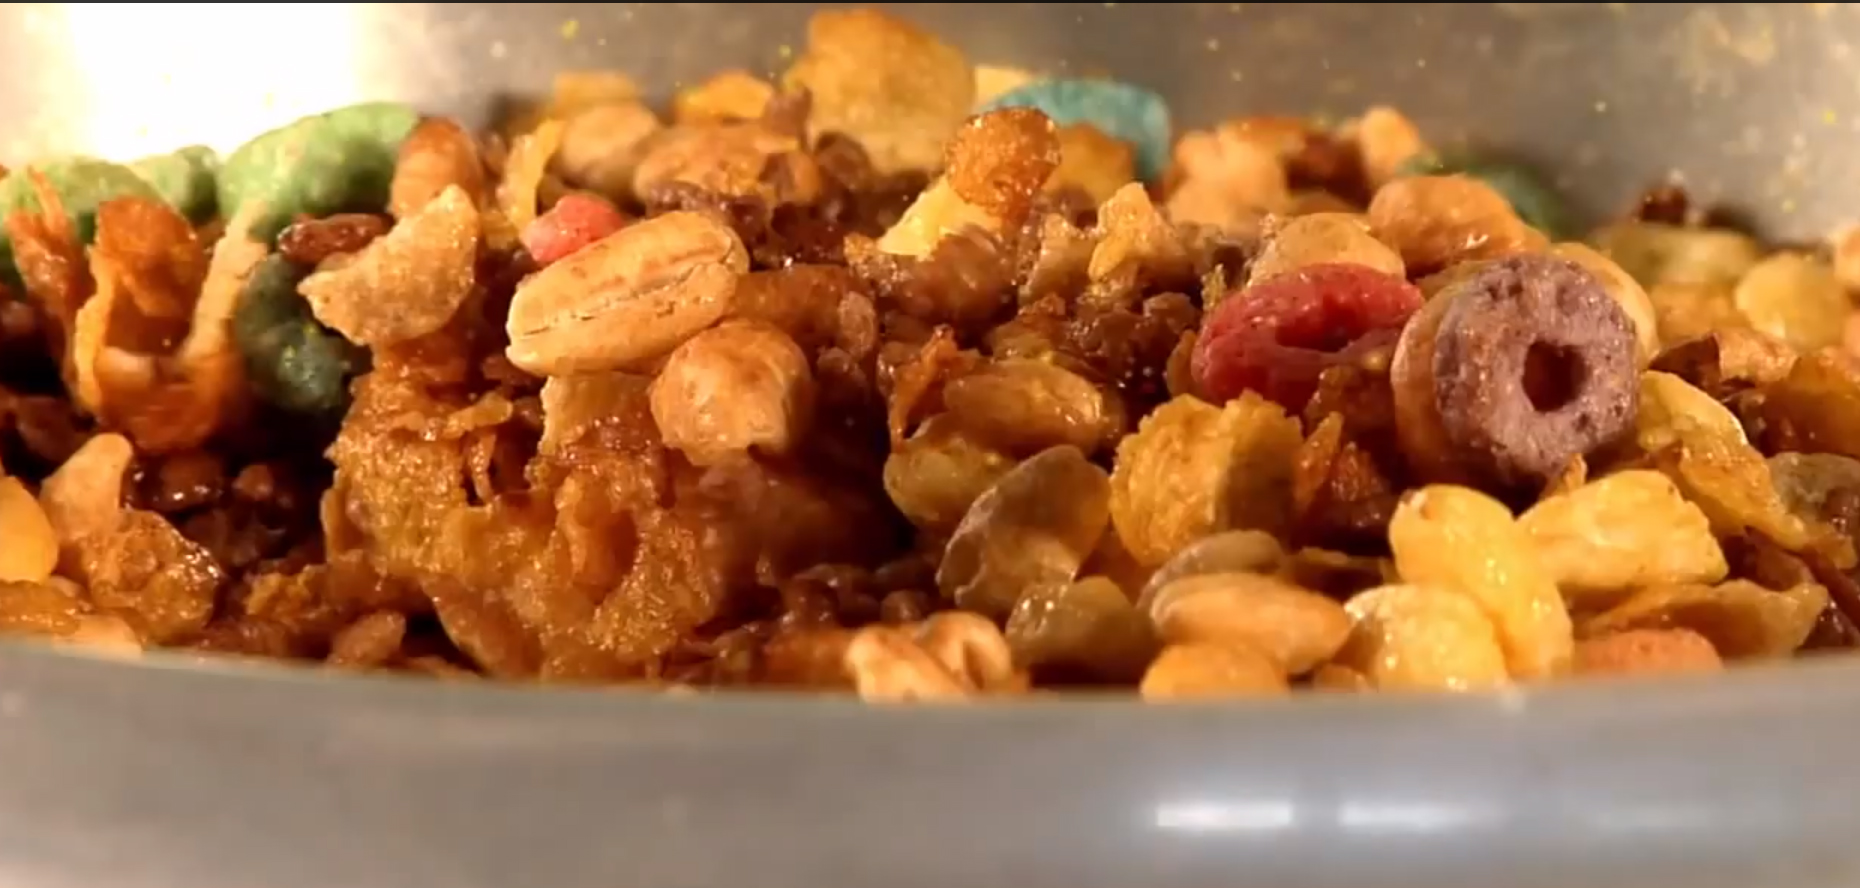 Fried Cereal Chow Mix? This Will Ultimately Change Snacking for Forever